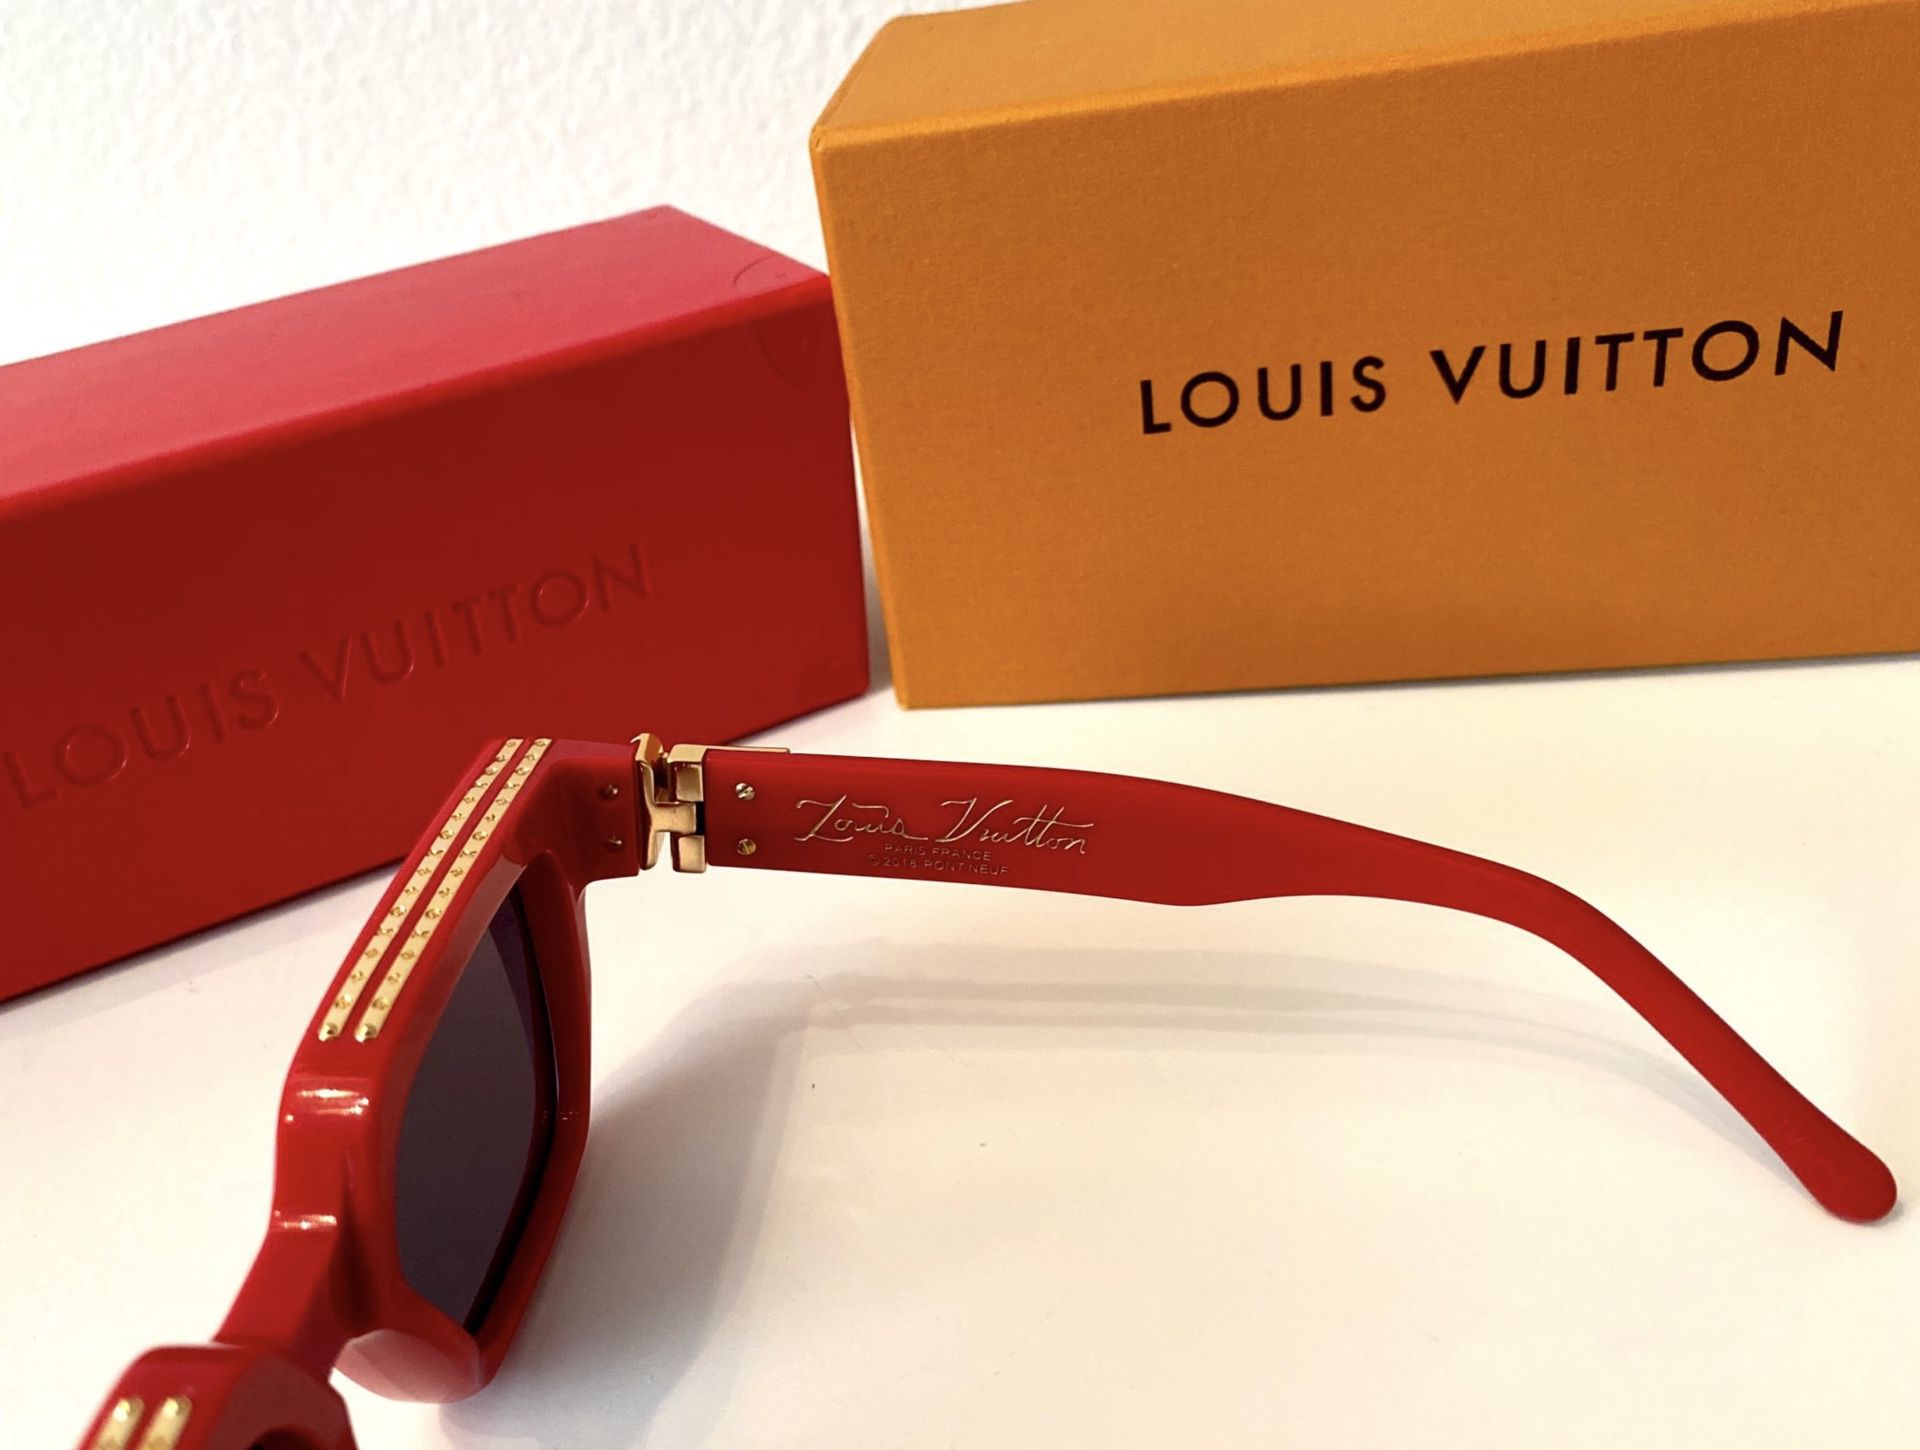 Louis Vuitton Evidence Millionaire Shades for Sale in Orange, CA